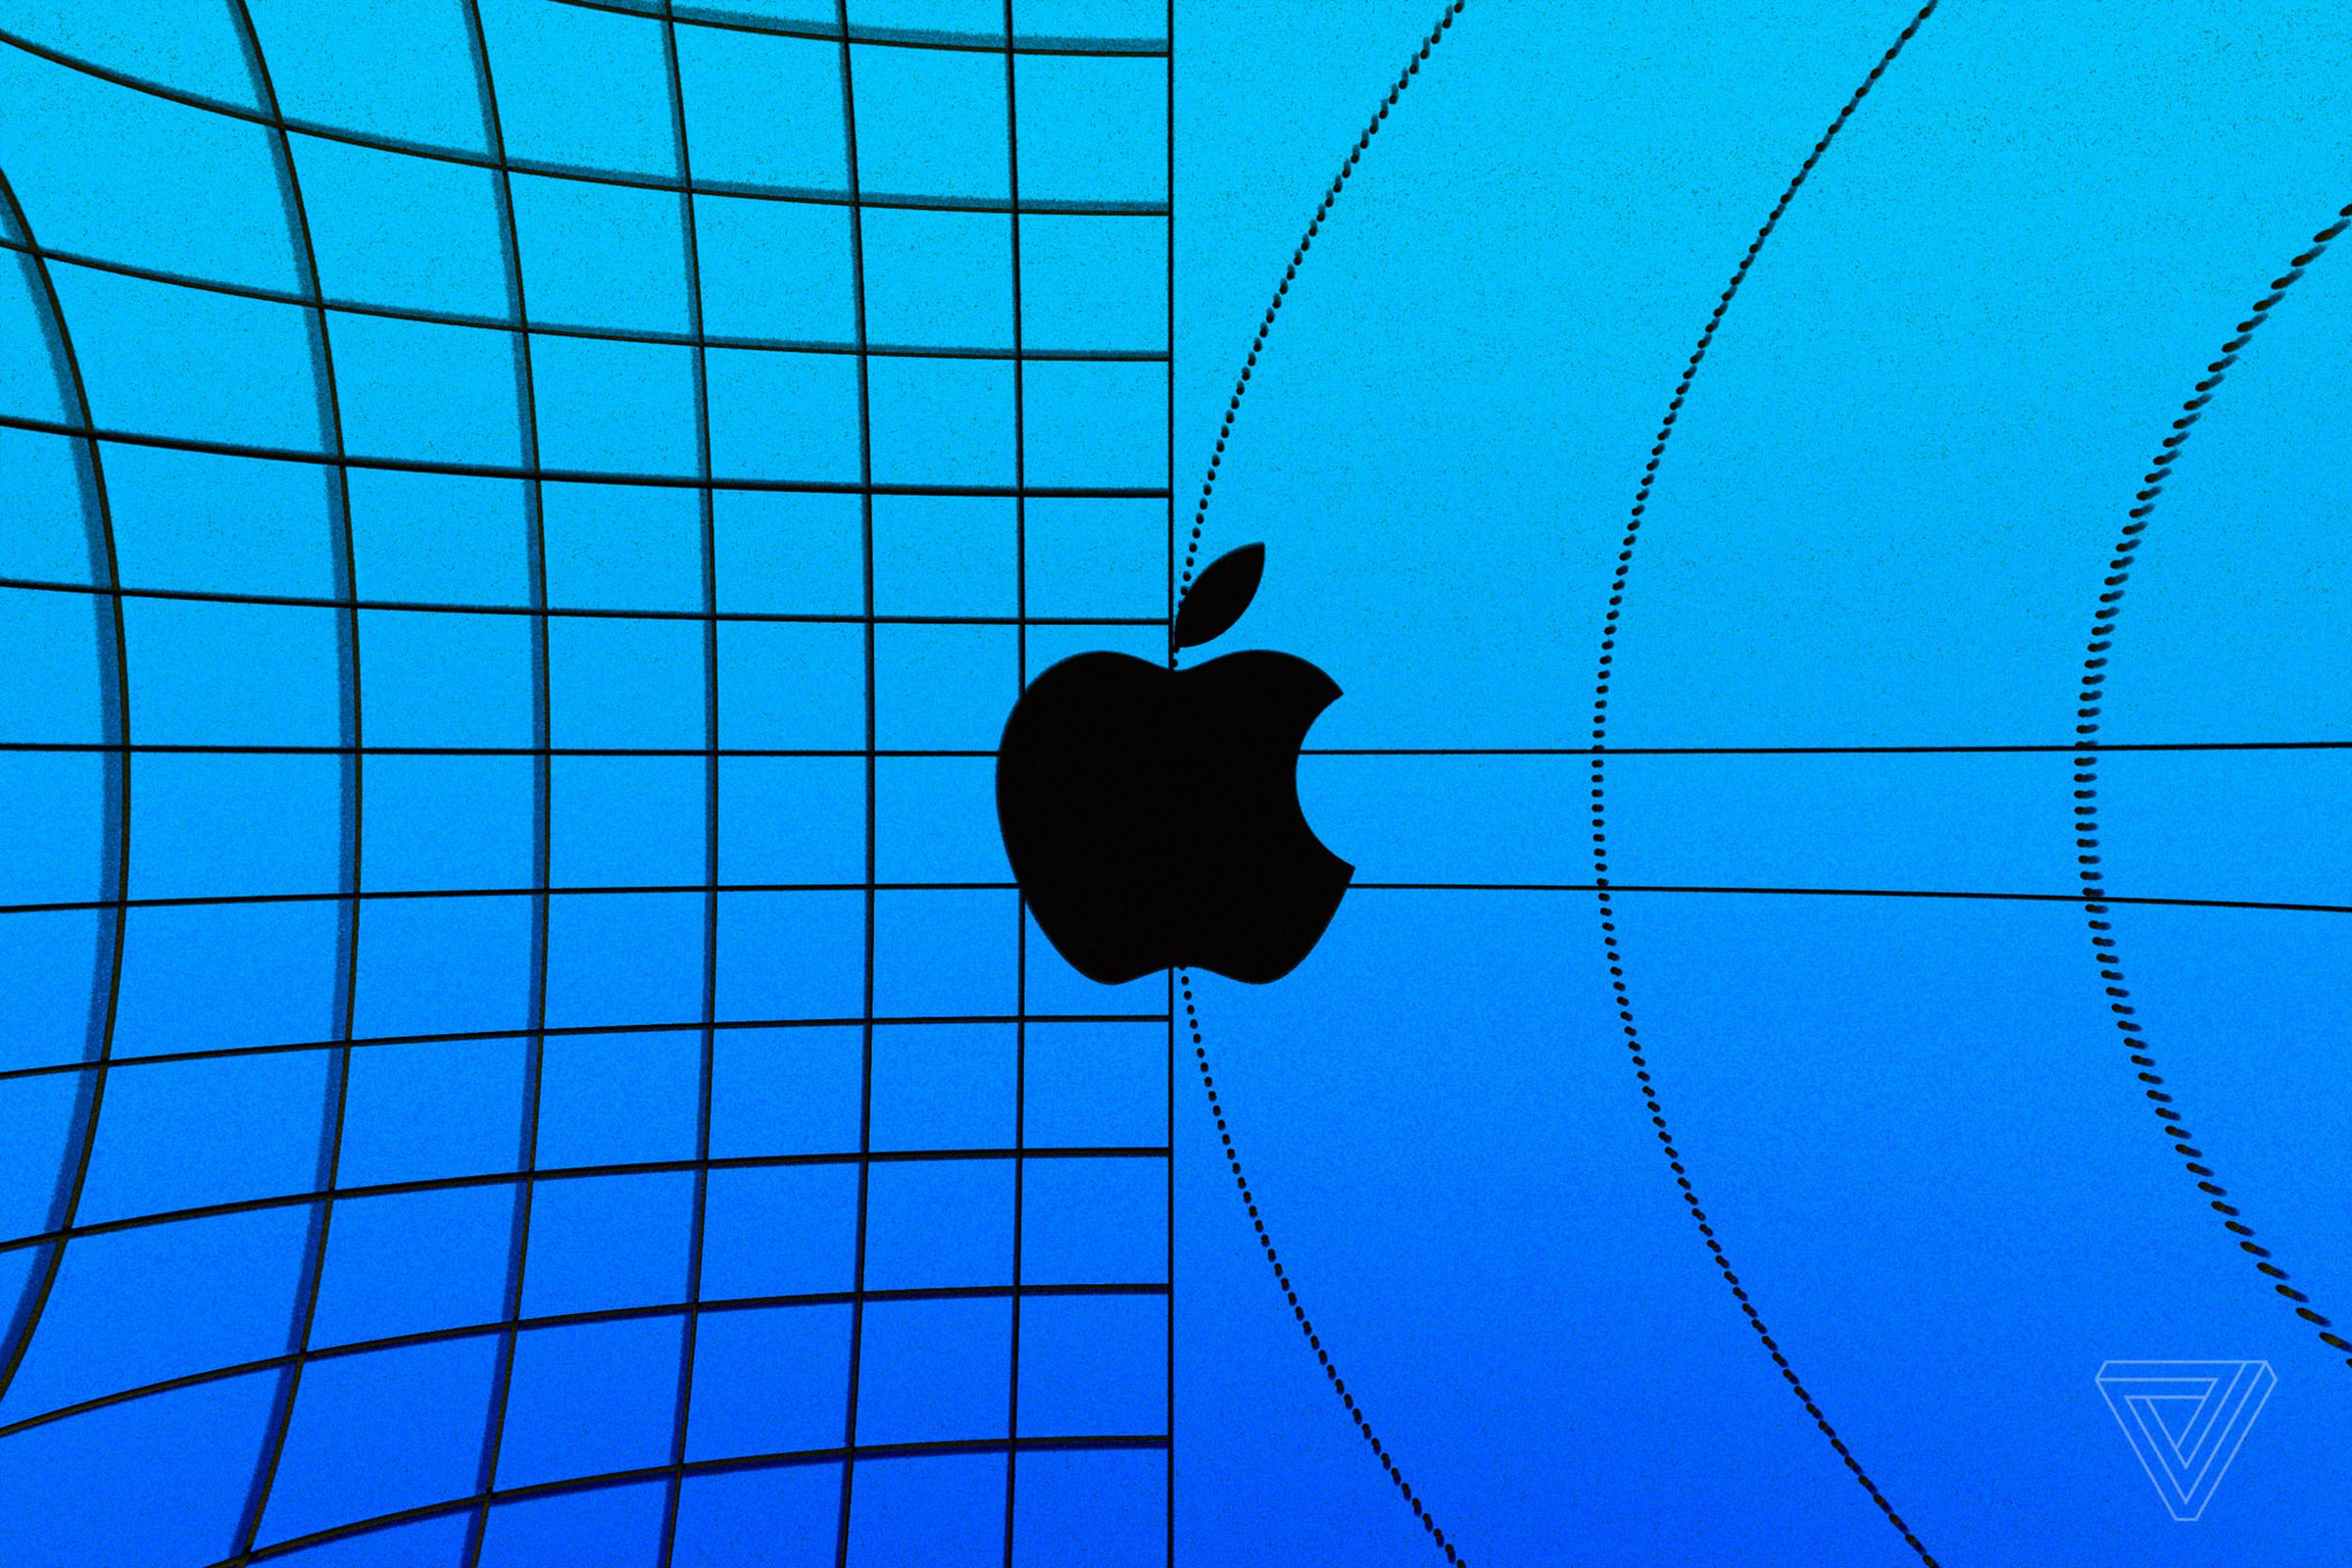 The Apple logo on a blue background